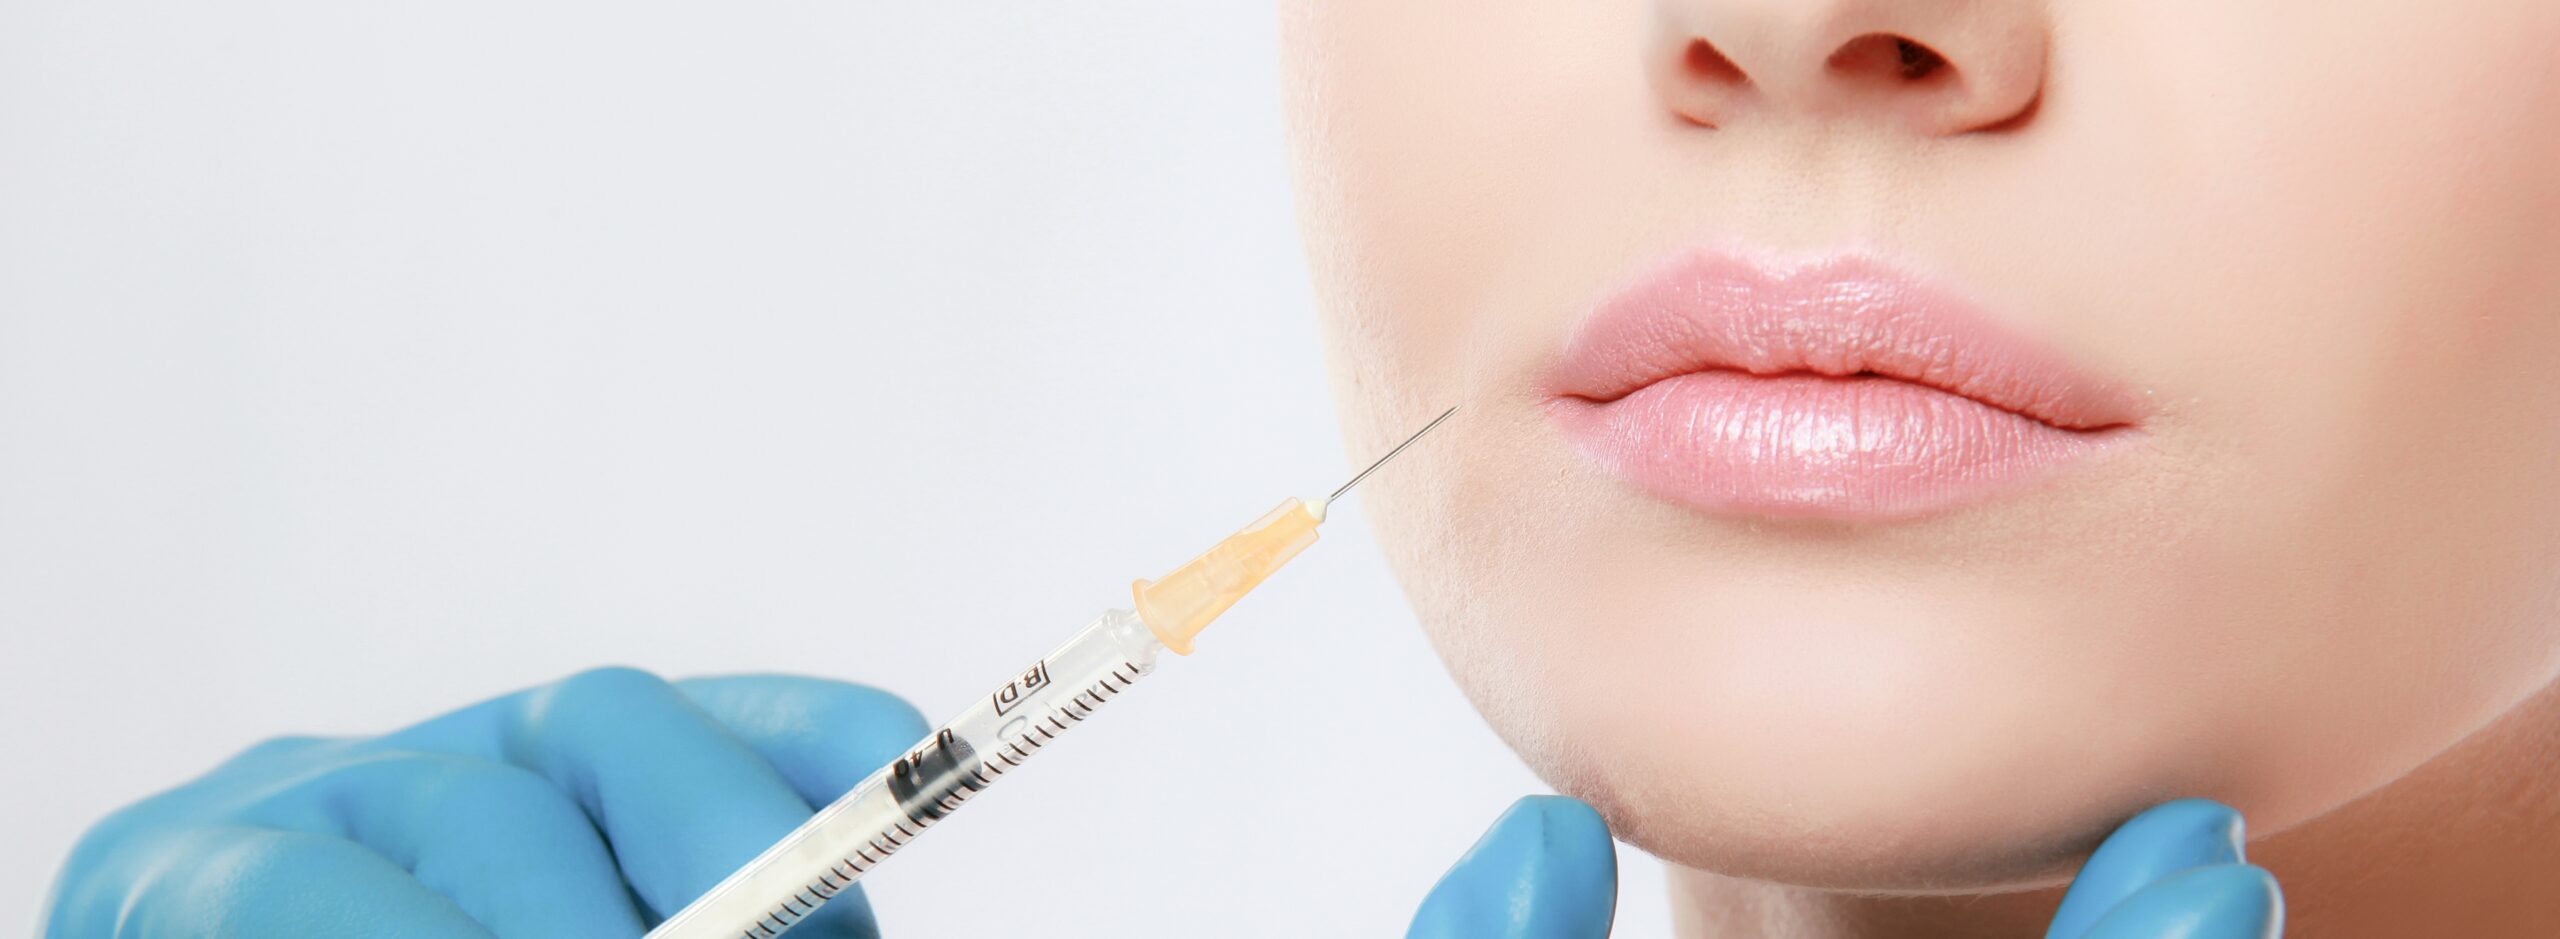 close-up of a woman's mouth about to receive dermal fillers